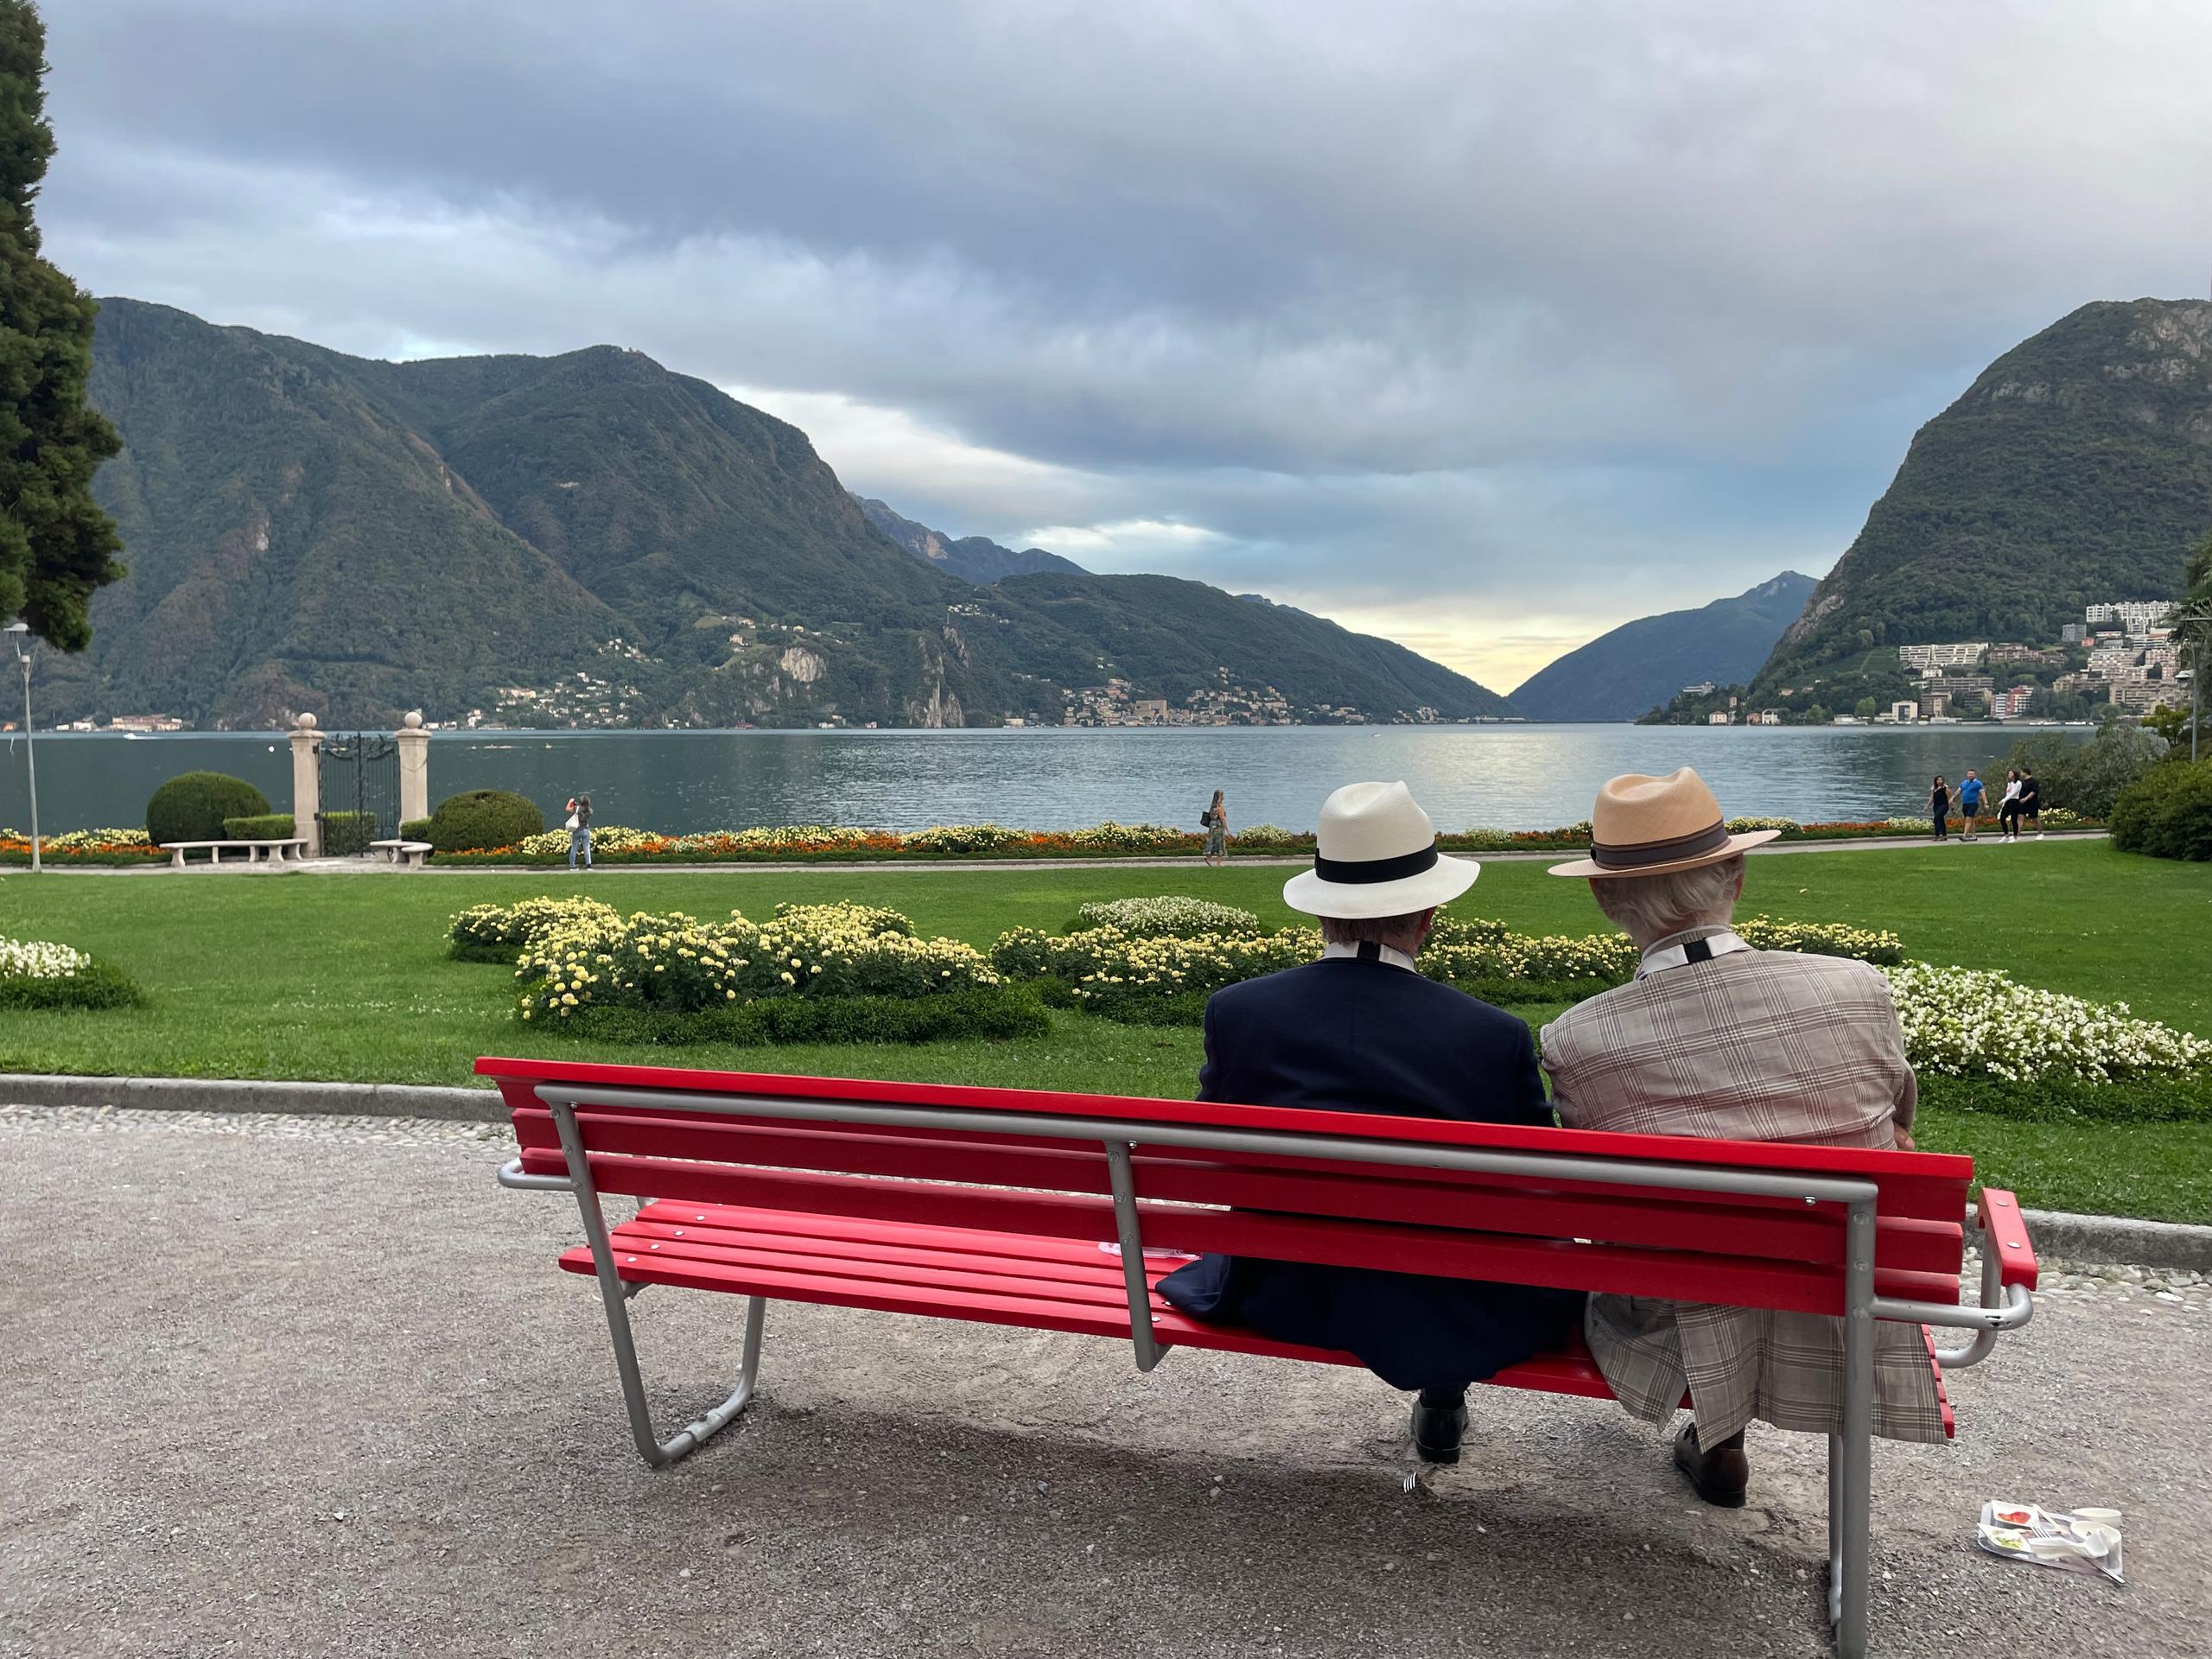 Two pensioners sitting on a bench overlooking the lake